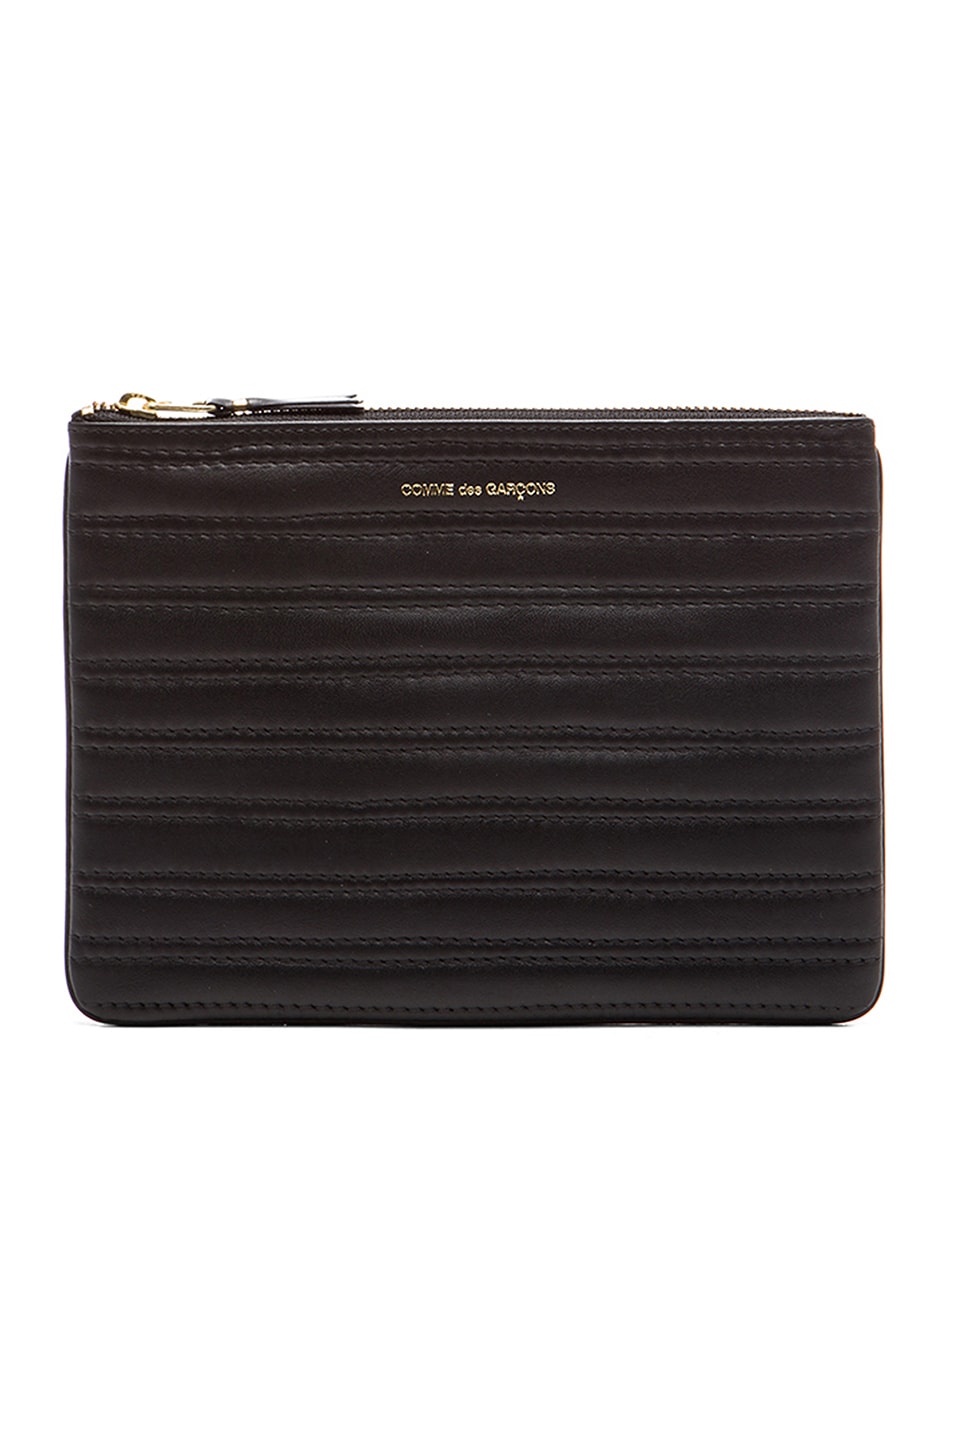 Image 1 of COMME des GARCONS Embossed Stitch Pouch in Black